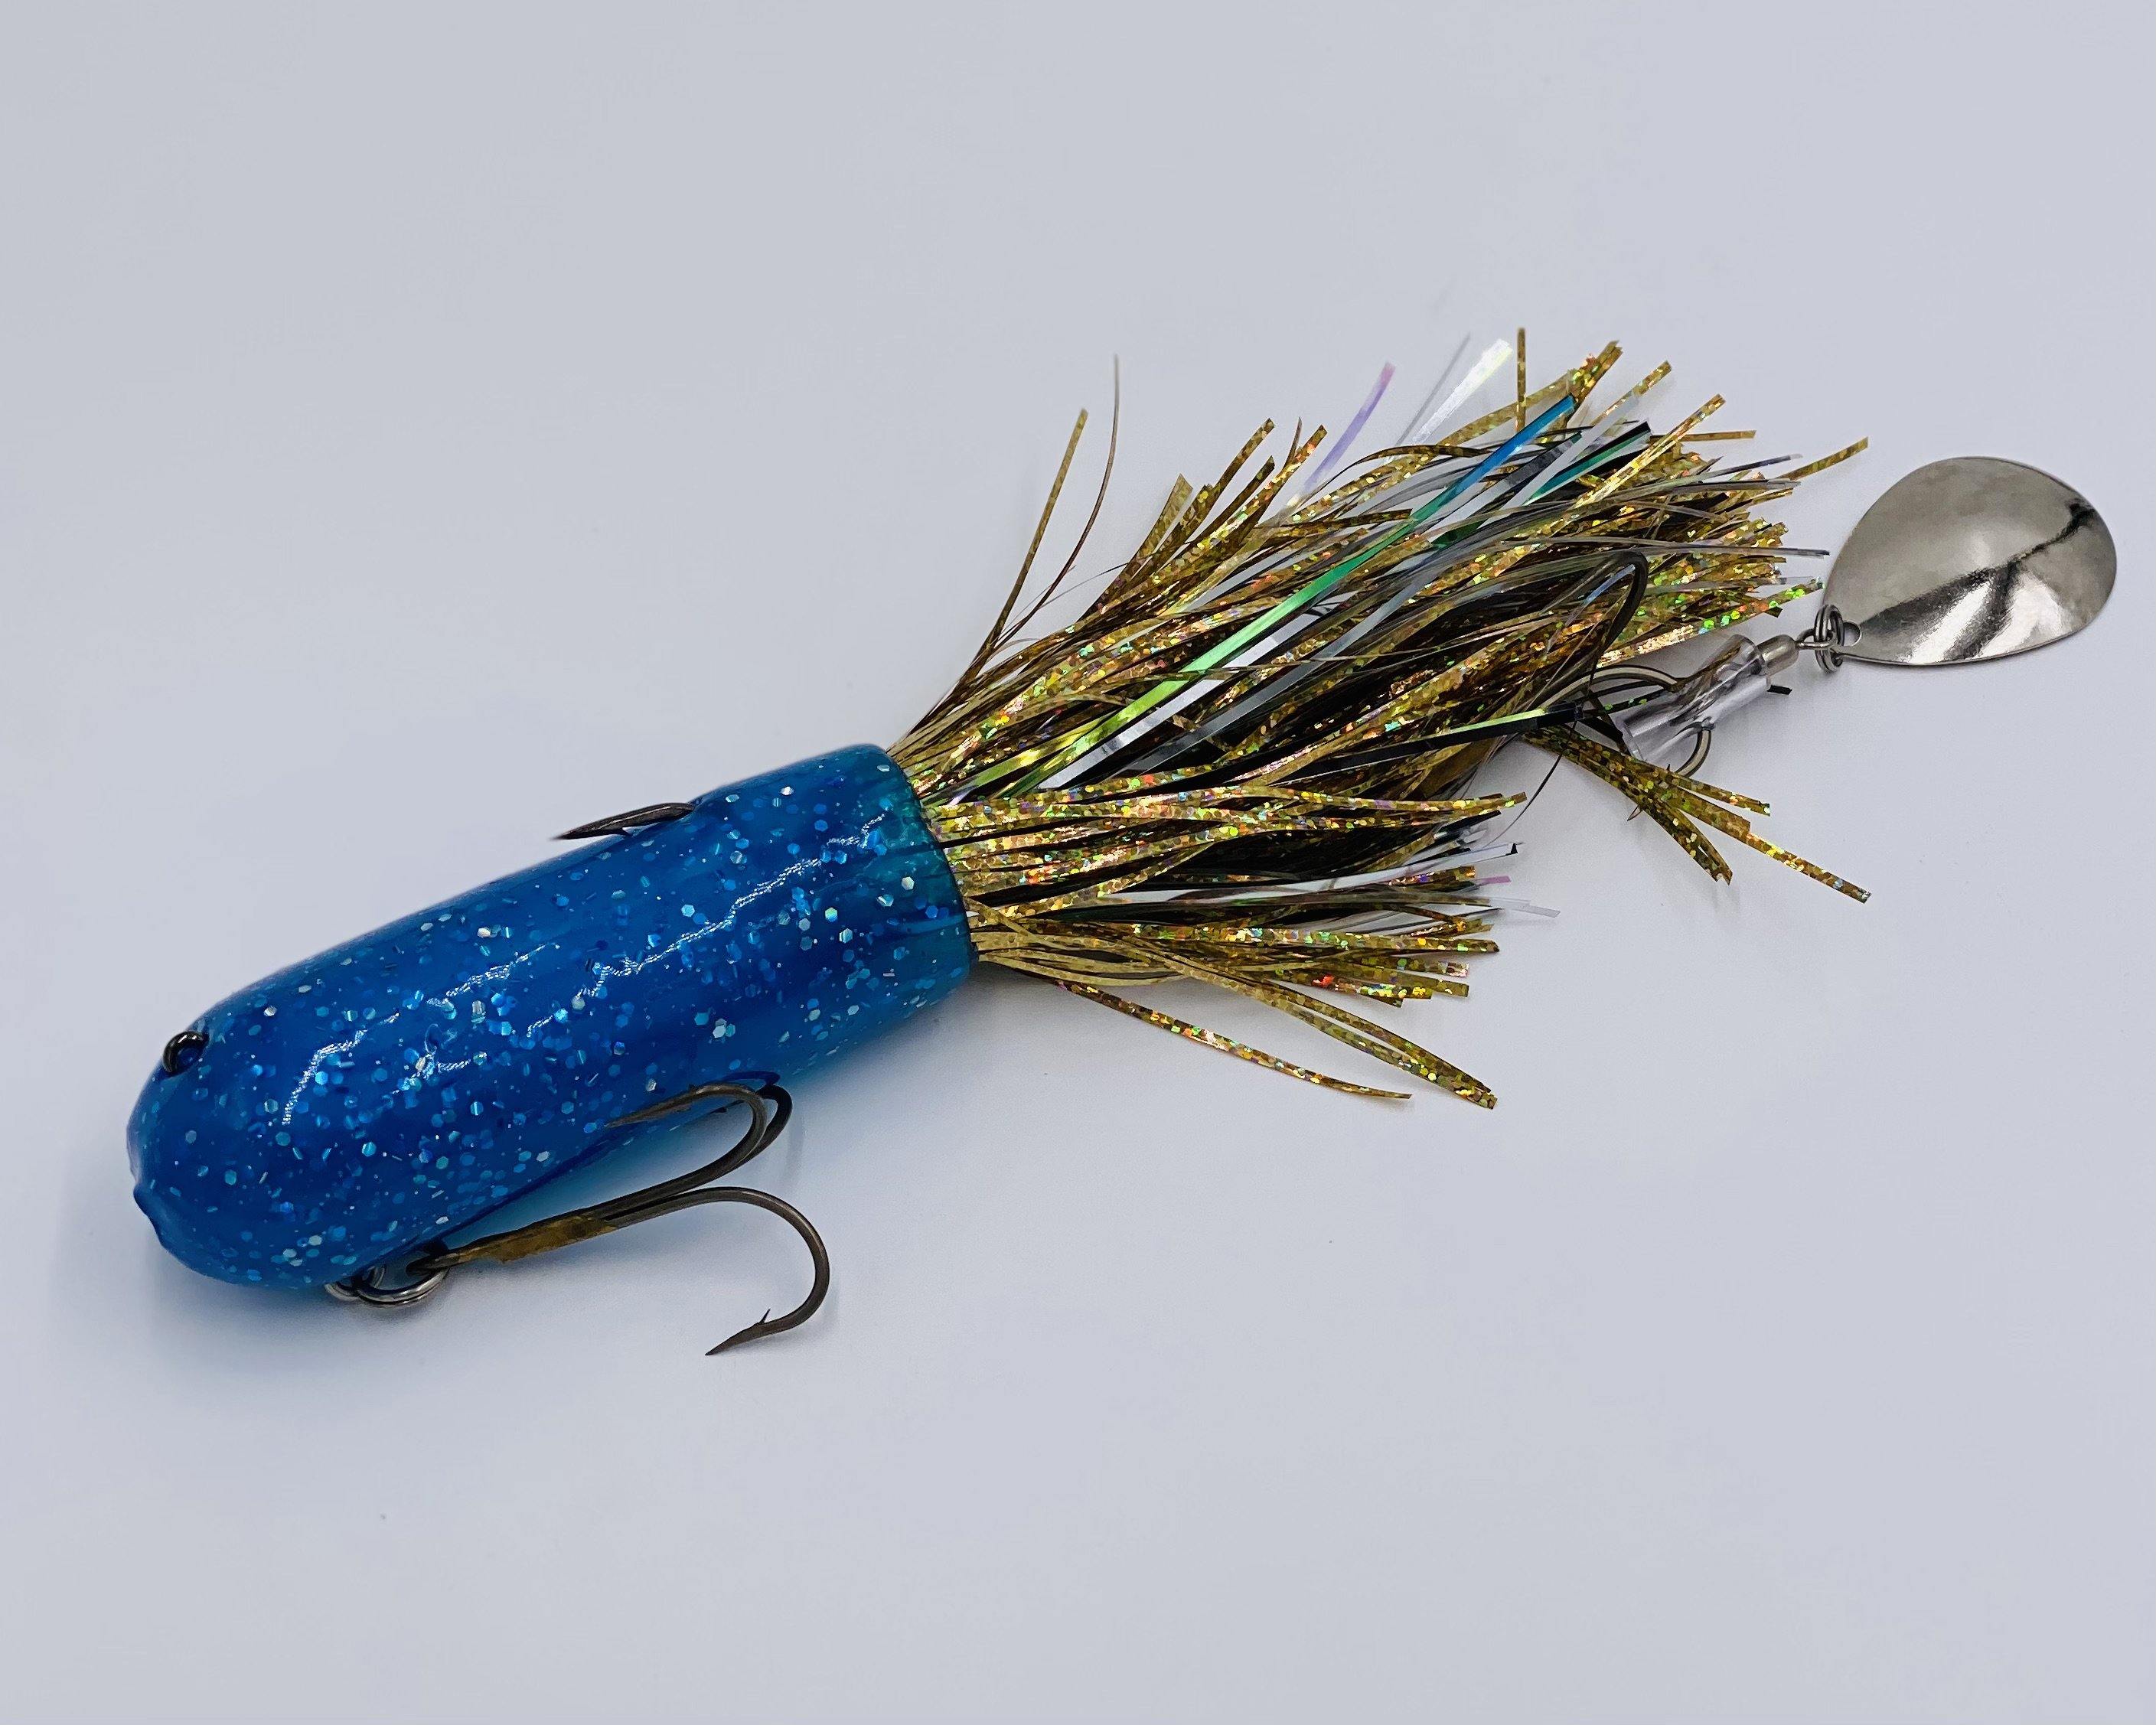 Buckeye Bait Corp Uncatalogued Red Head Red Back Glitter Bug N Bass Lure